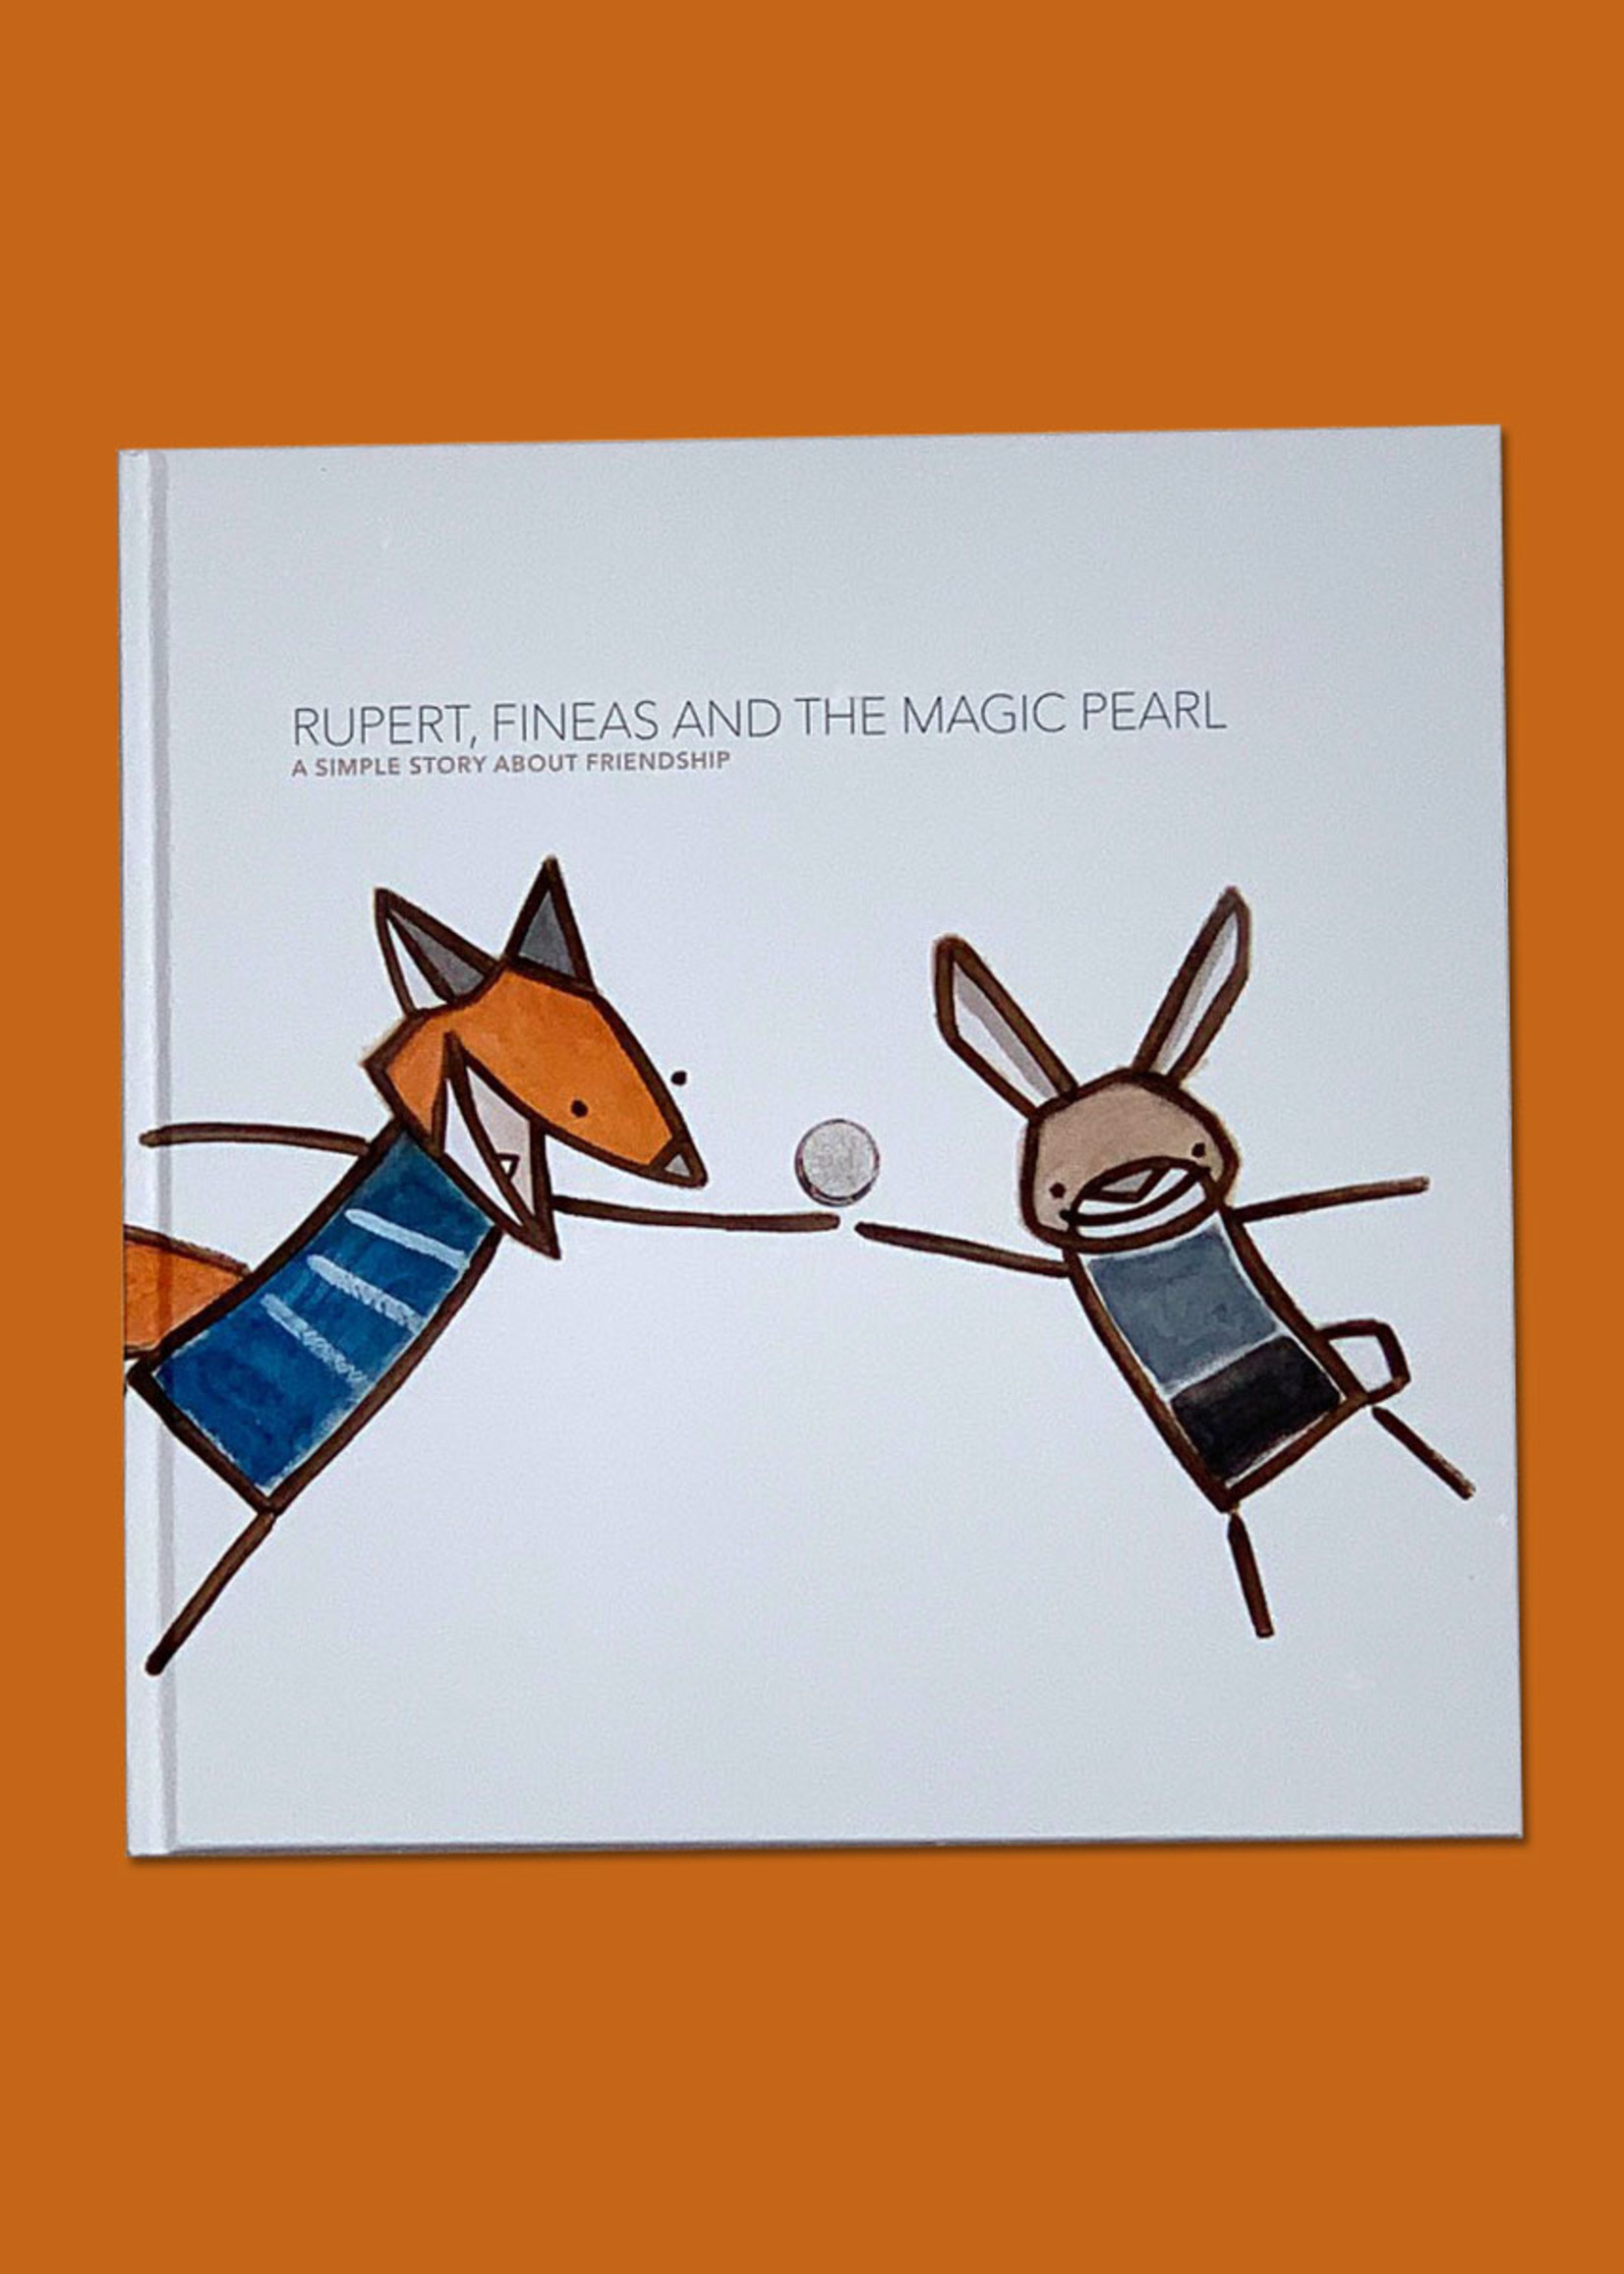 RUPERT, FINEAS AND THE MAGIC PEARL BOOK